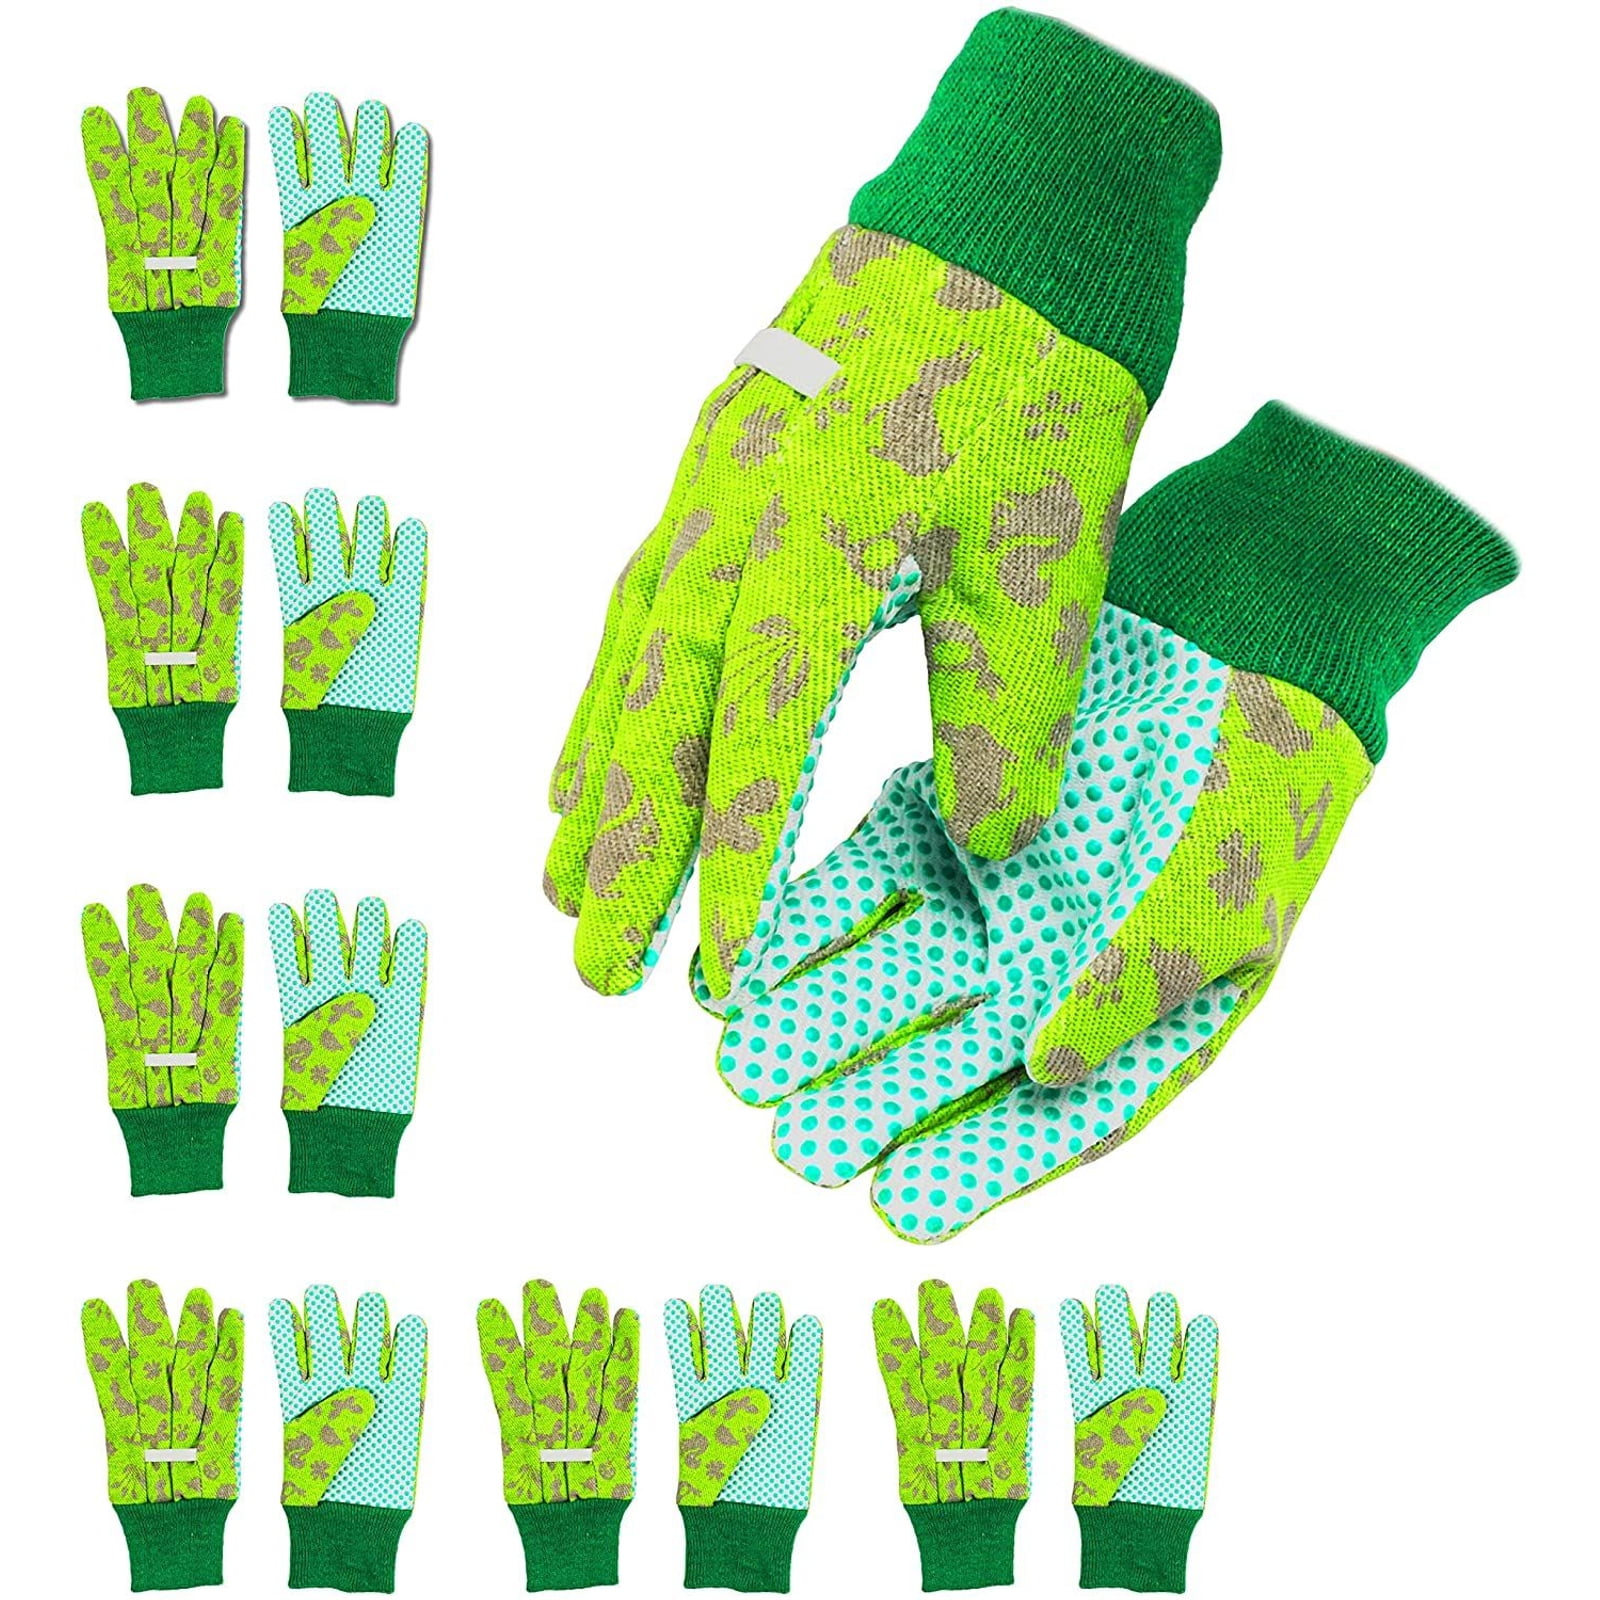 Age 5-6 , Yellow 3 Pairs Kids Gardening Gloves 3 Pairs Candy Colors Children Garden Gloves with Rubber Coated Palm for Age 2-13 Girls Boys Size 3